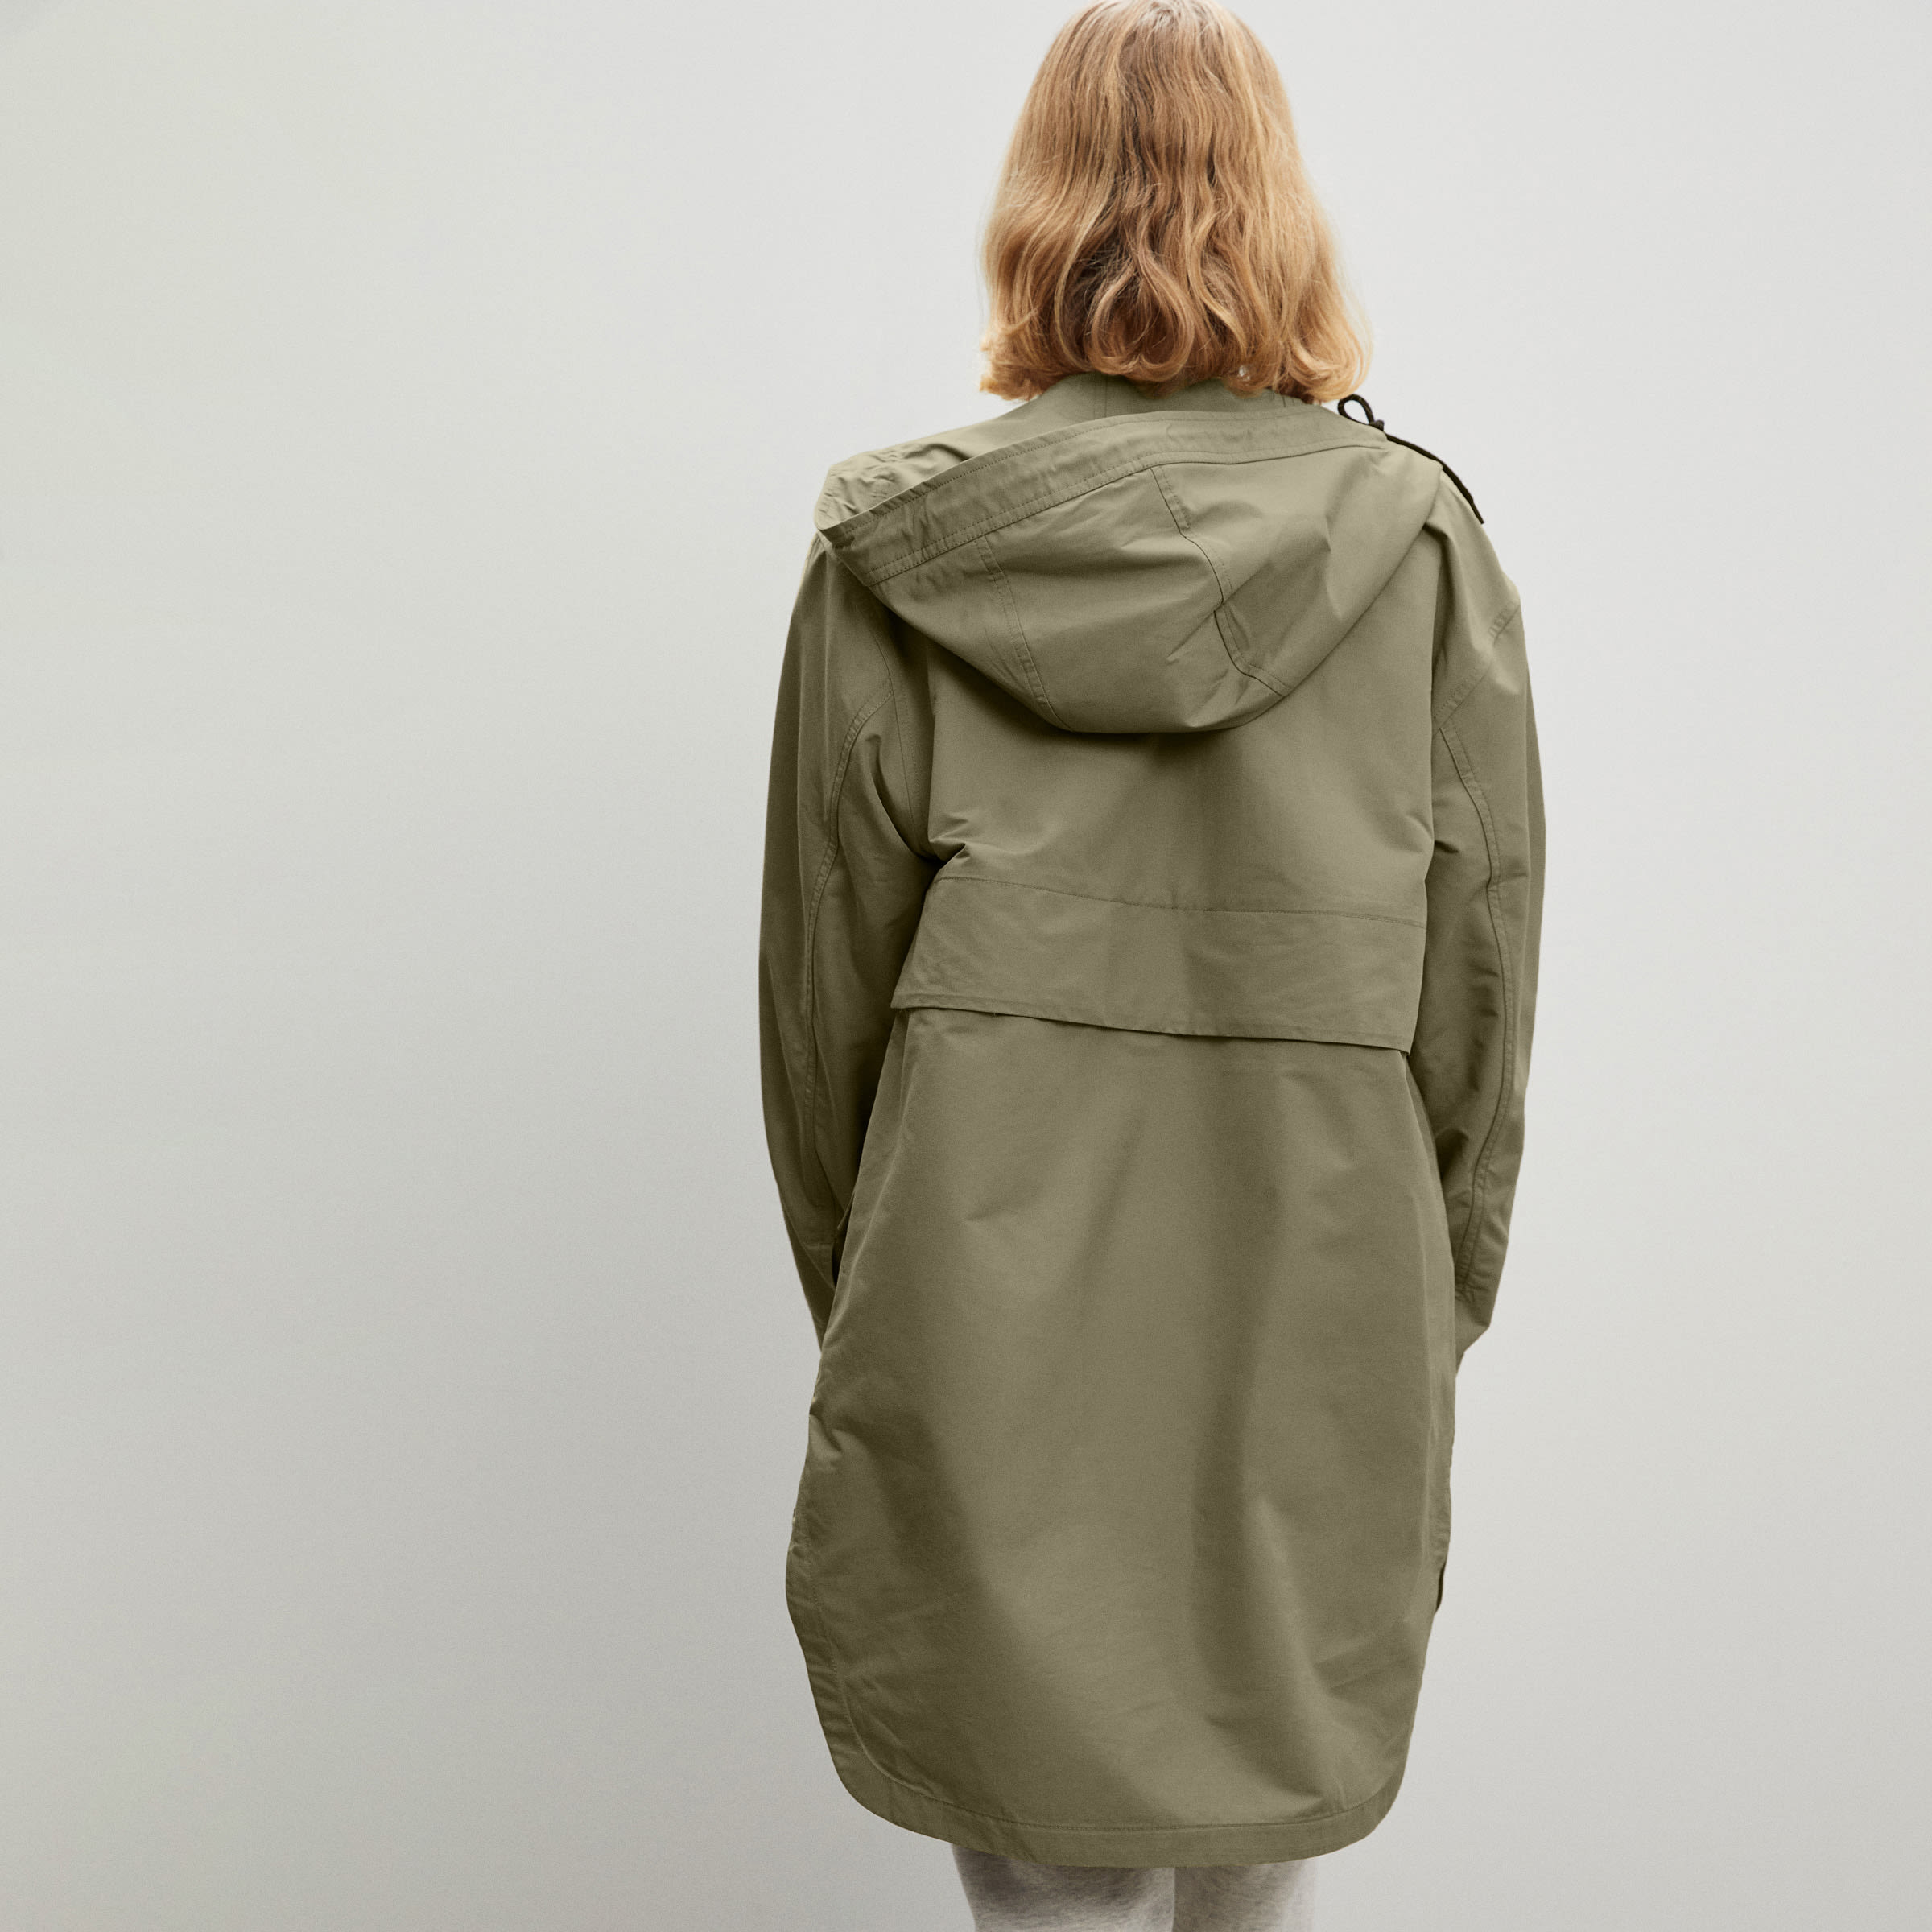 Everlane ReNew Anorak Review: Photos and Our Honest Thoughts